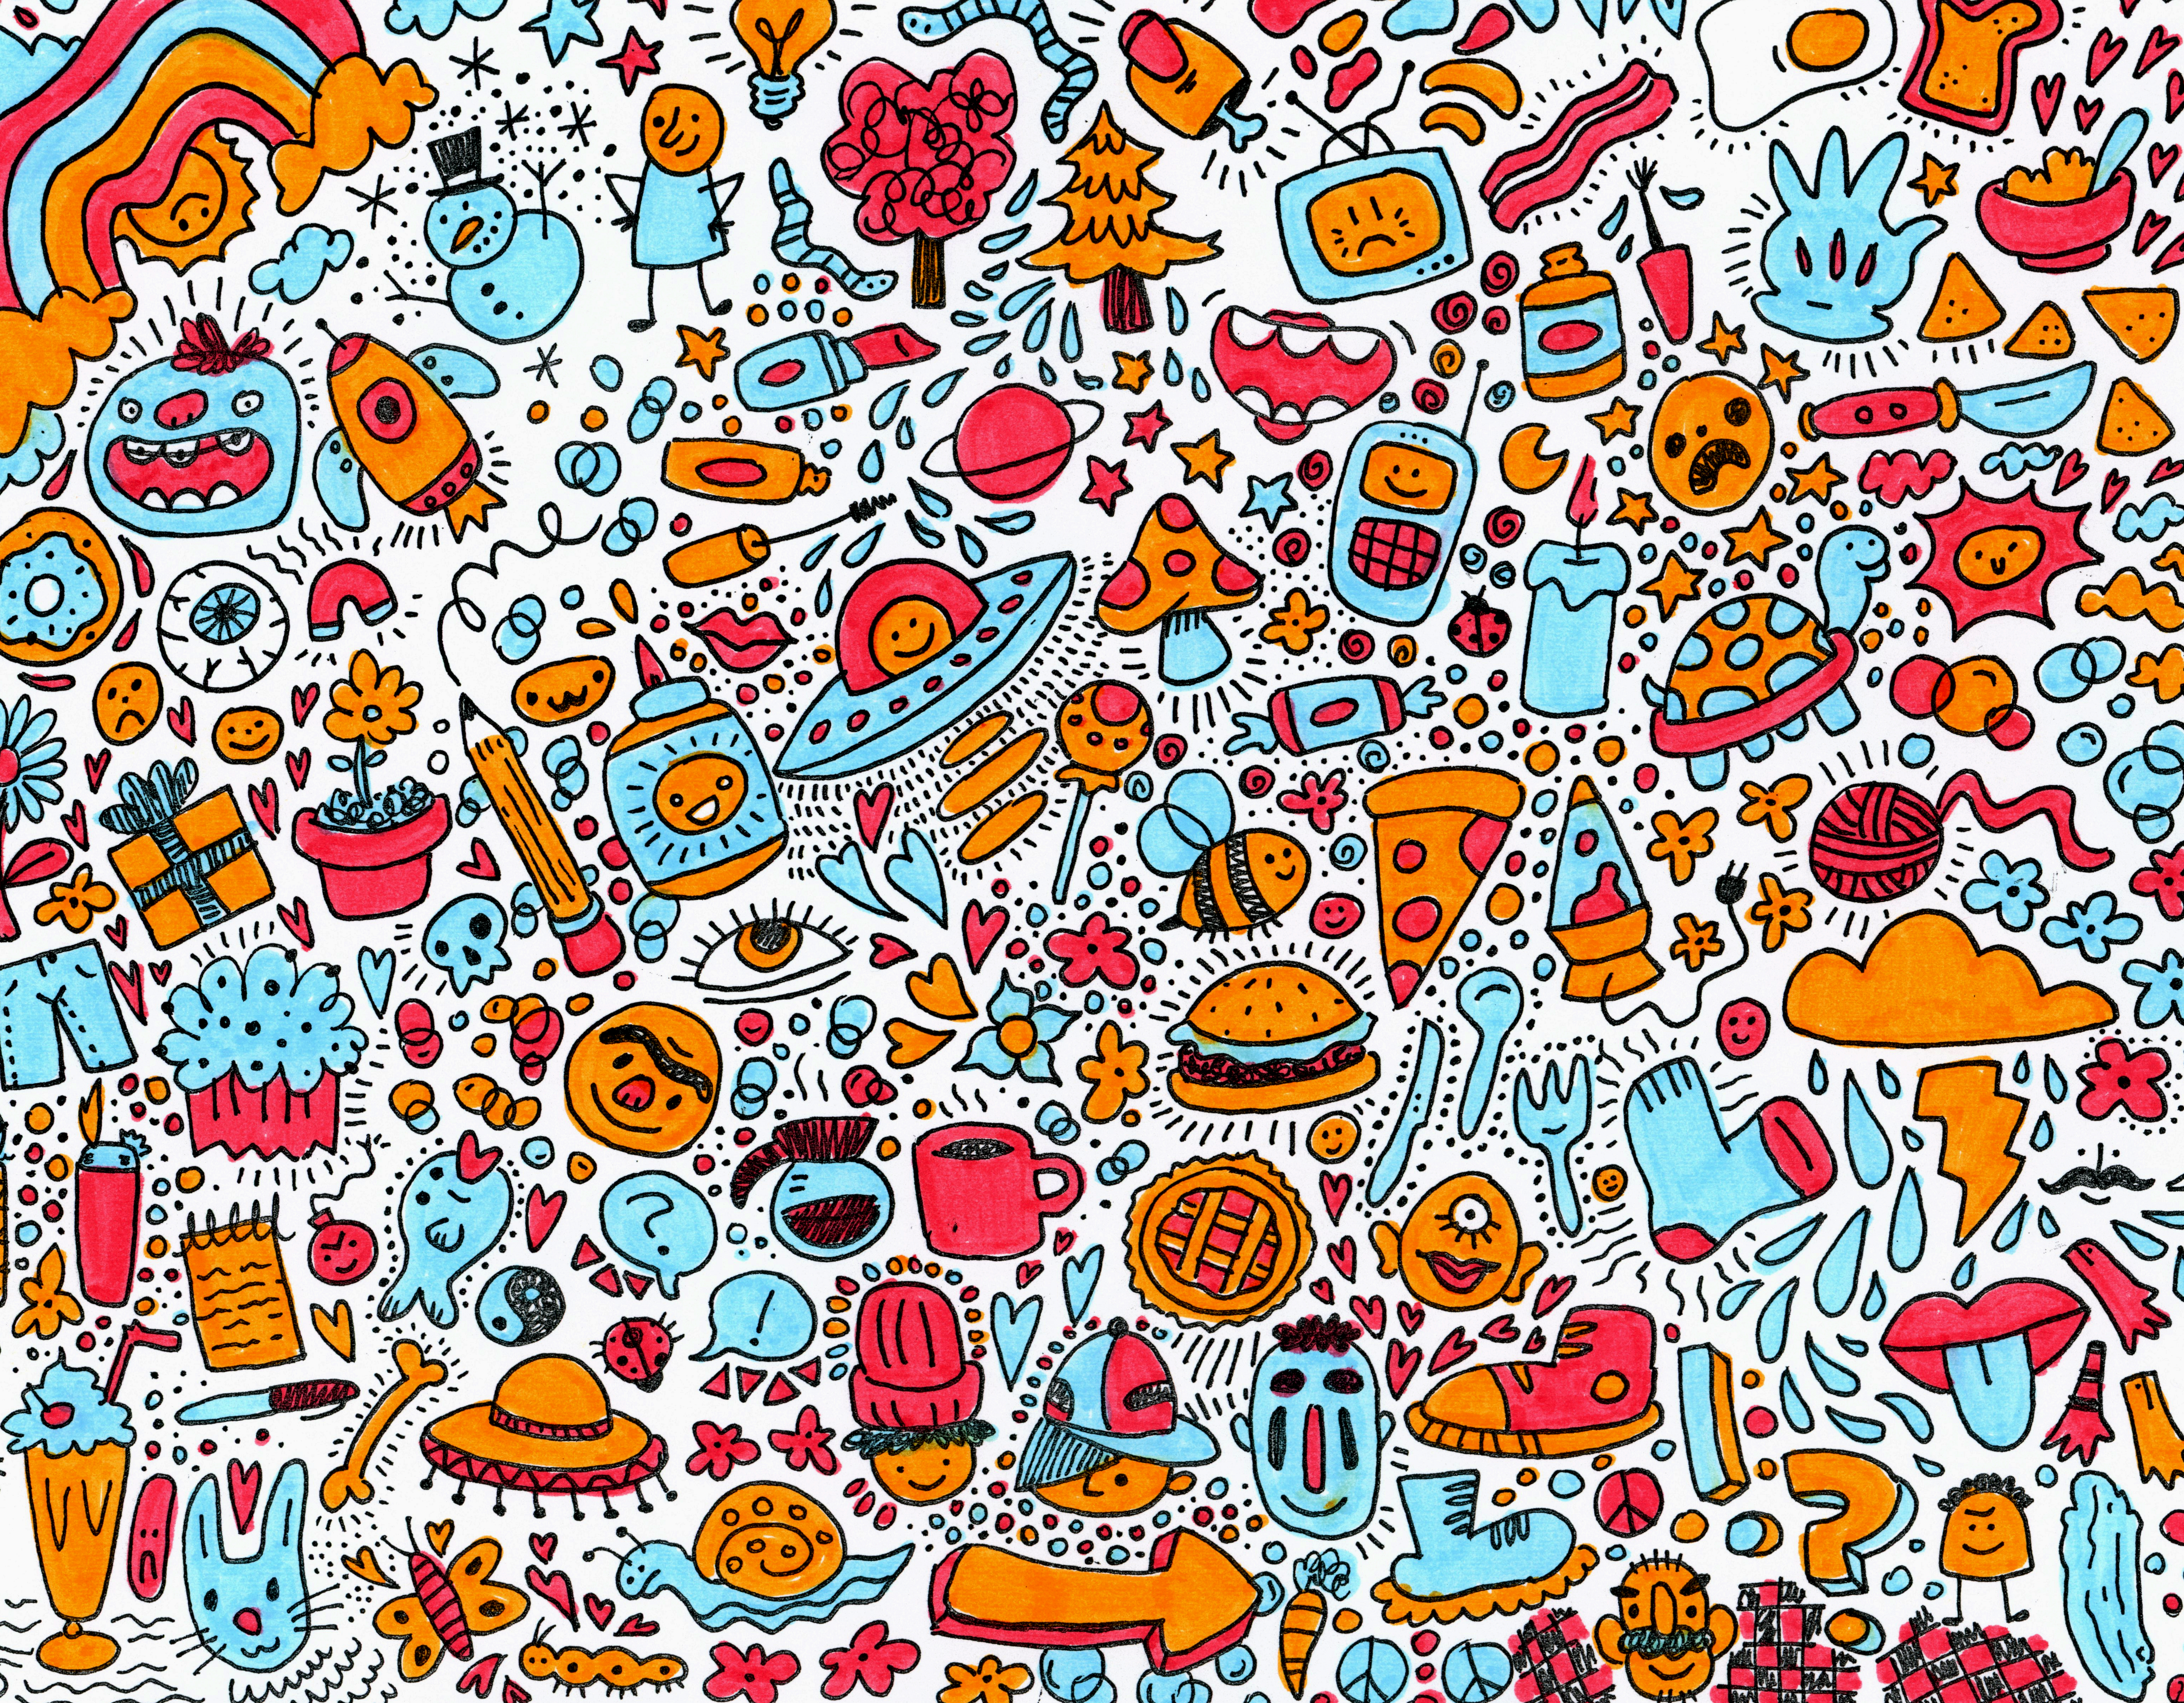 Multicolor doodles of random things like food, coffee cups, trees, pizzas, shoes, flowers, tvs, question marks, yarn, and etc. 